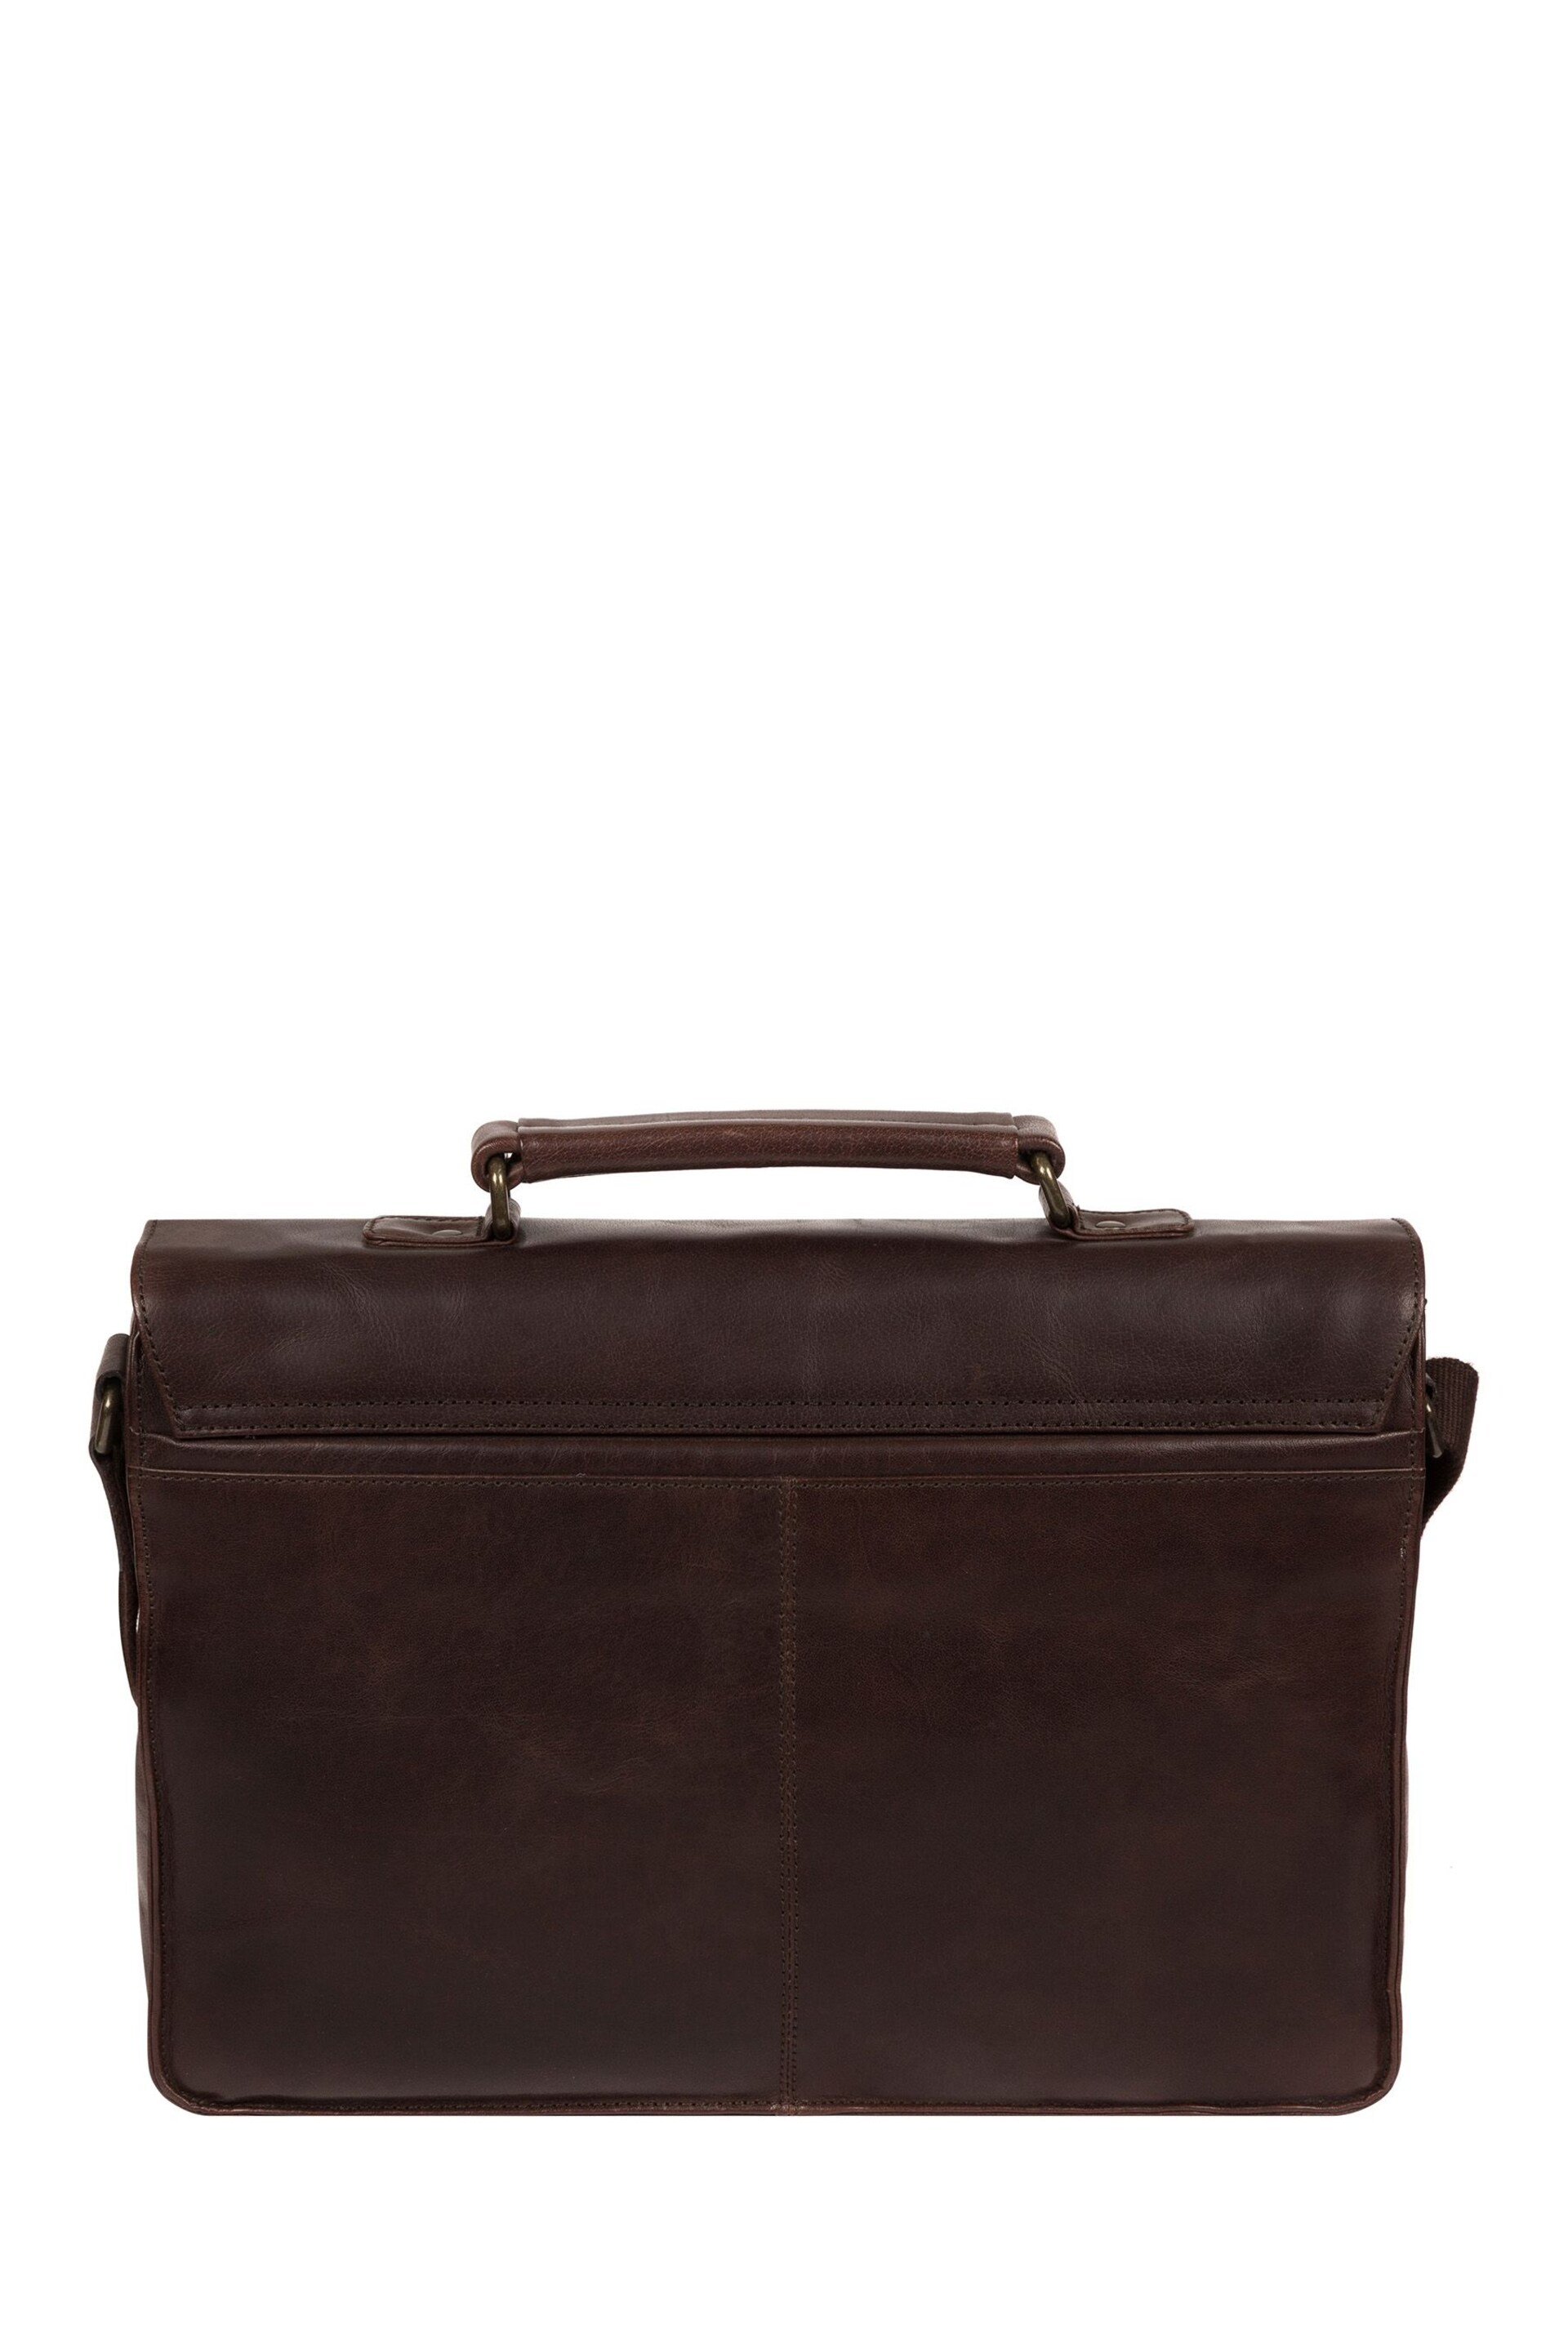 Conkca Pinter Leather Work Bag - Image 2 of 8